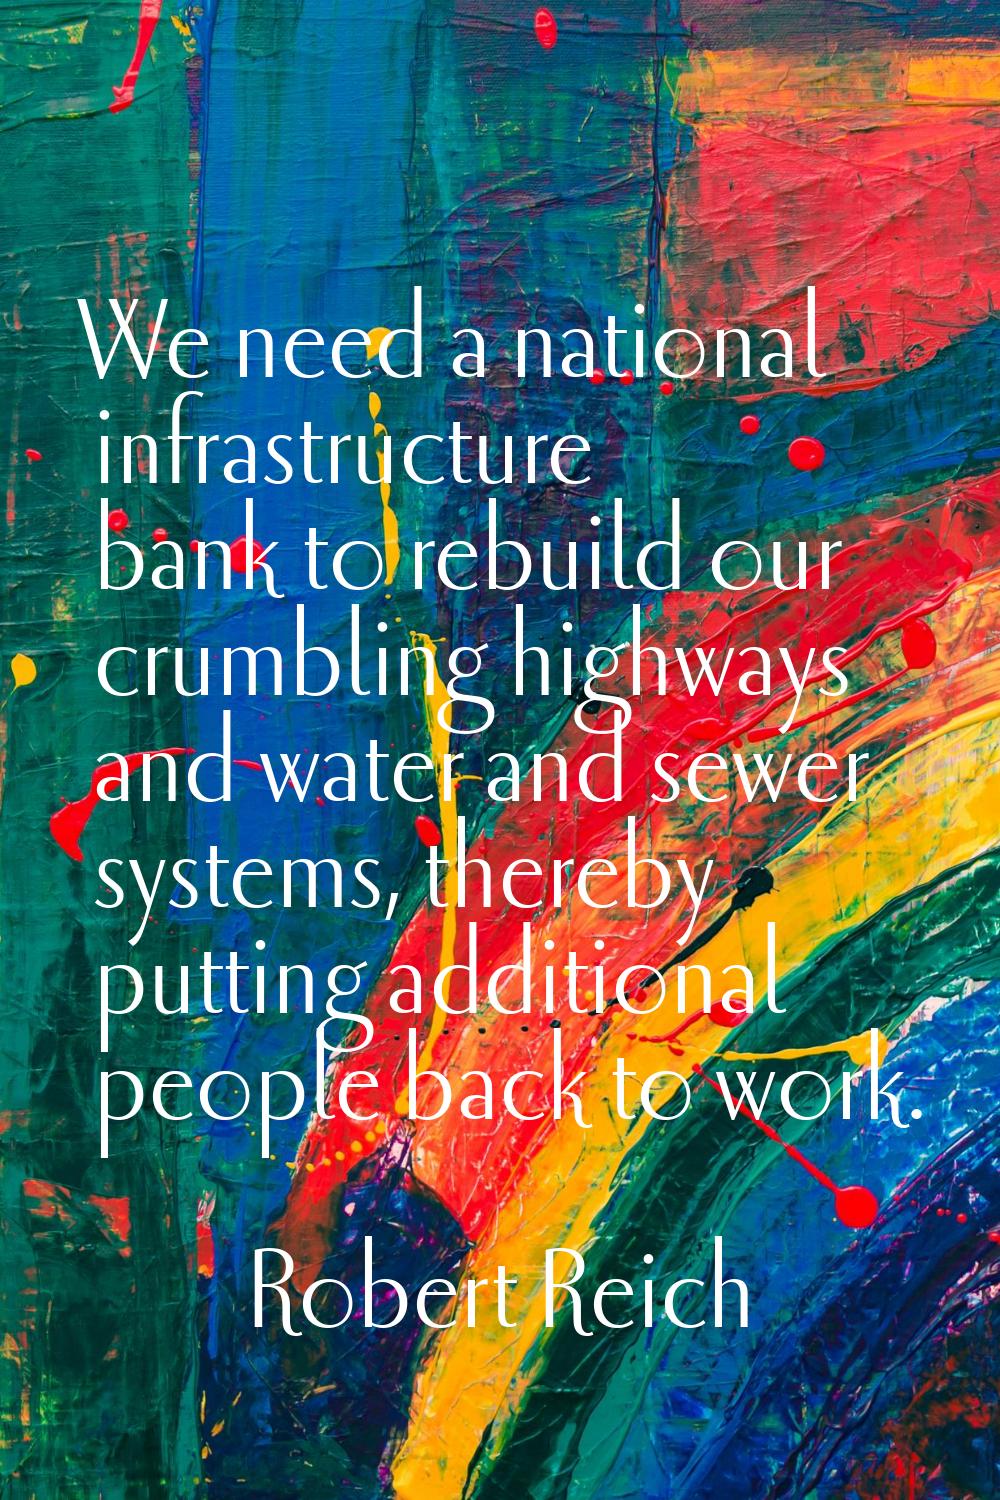 We need a national infrastructure bank to rebuild our crumbling highways and water and sewer system